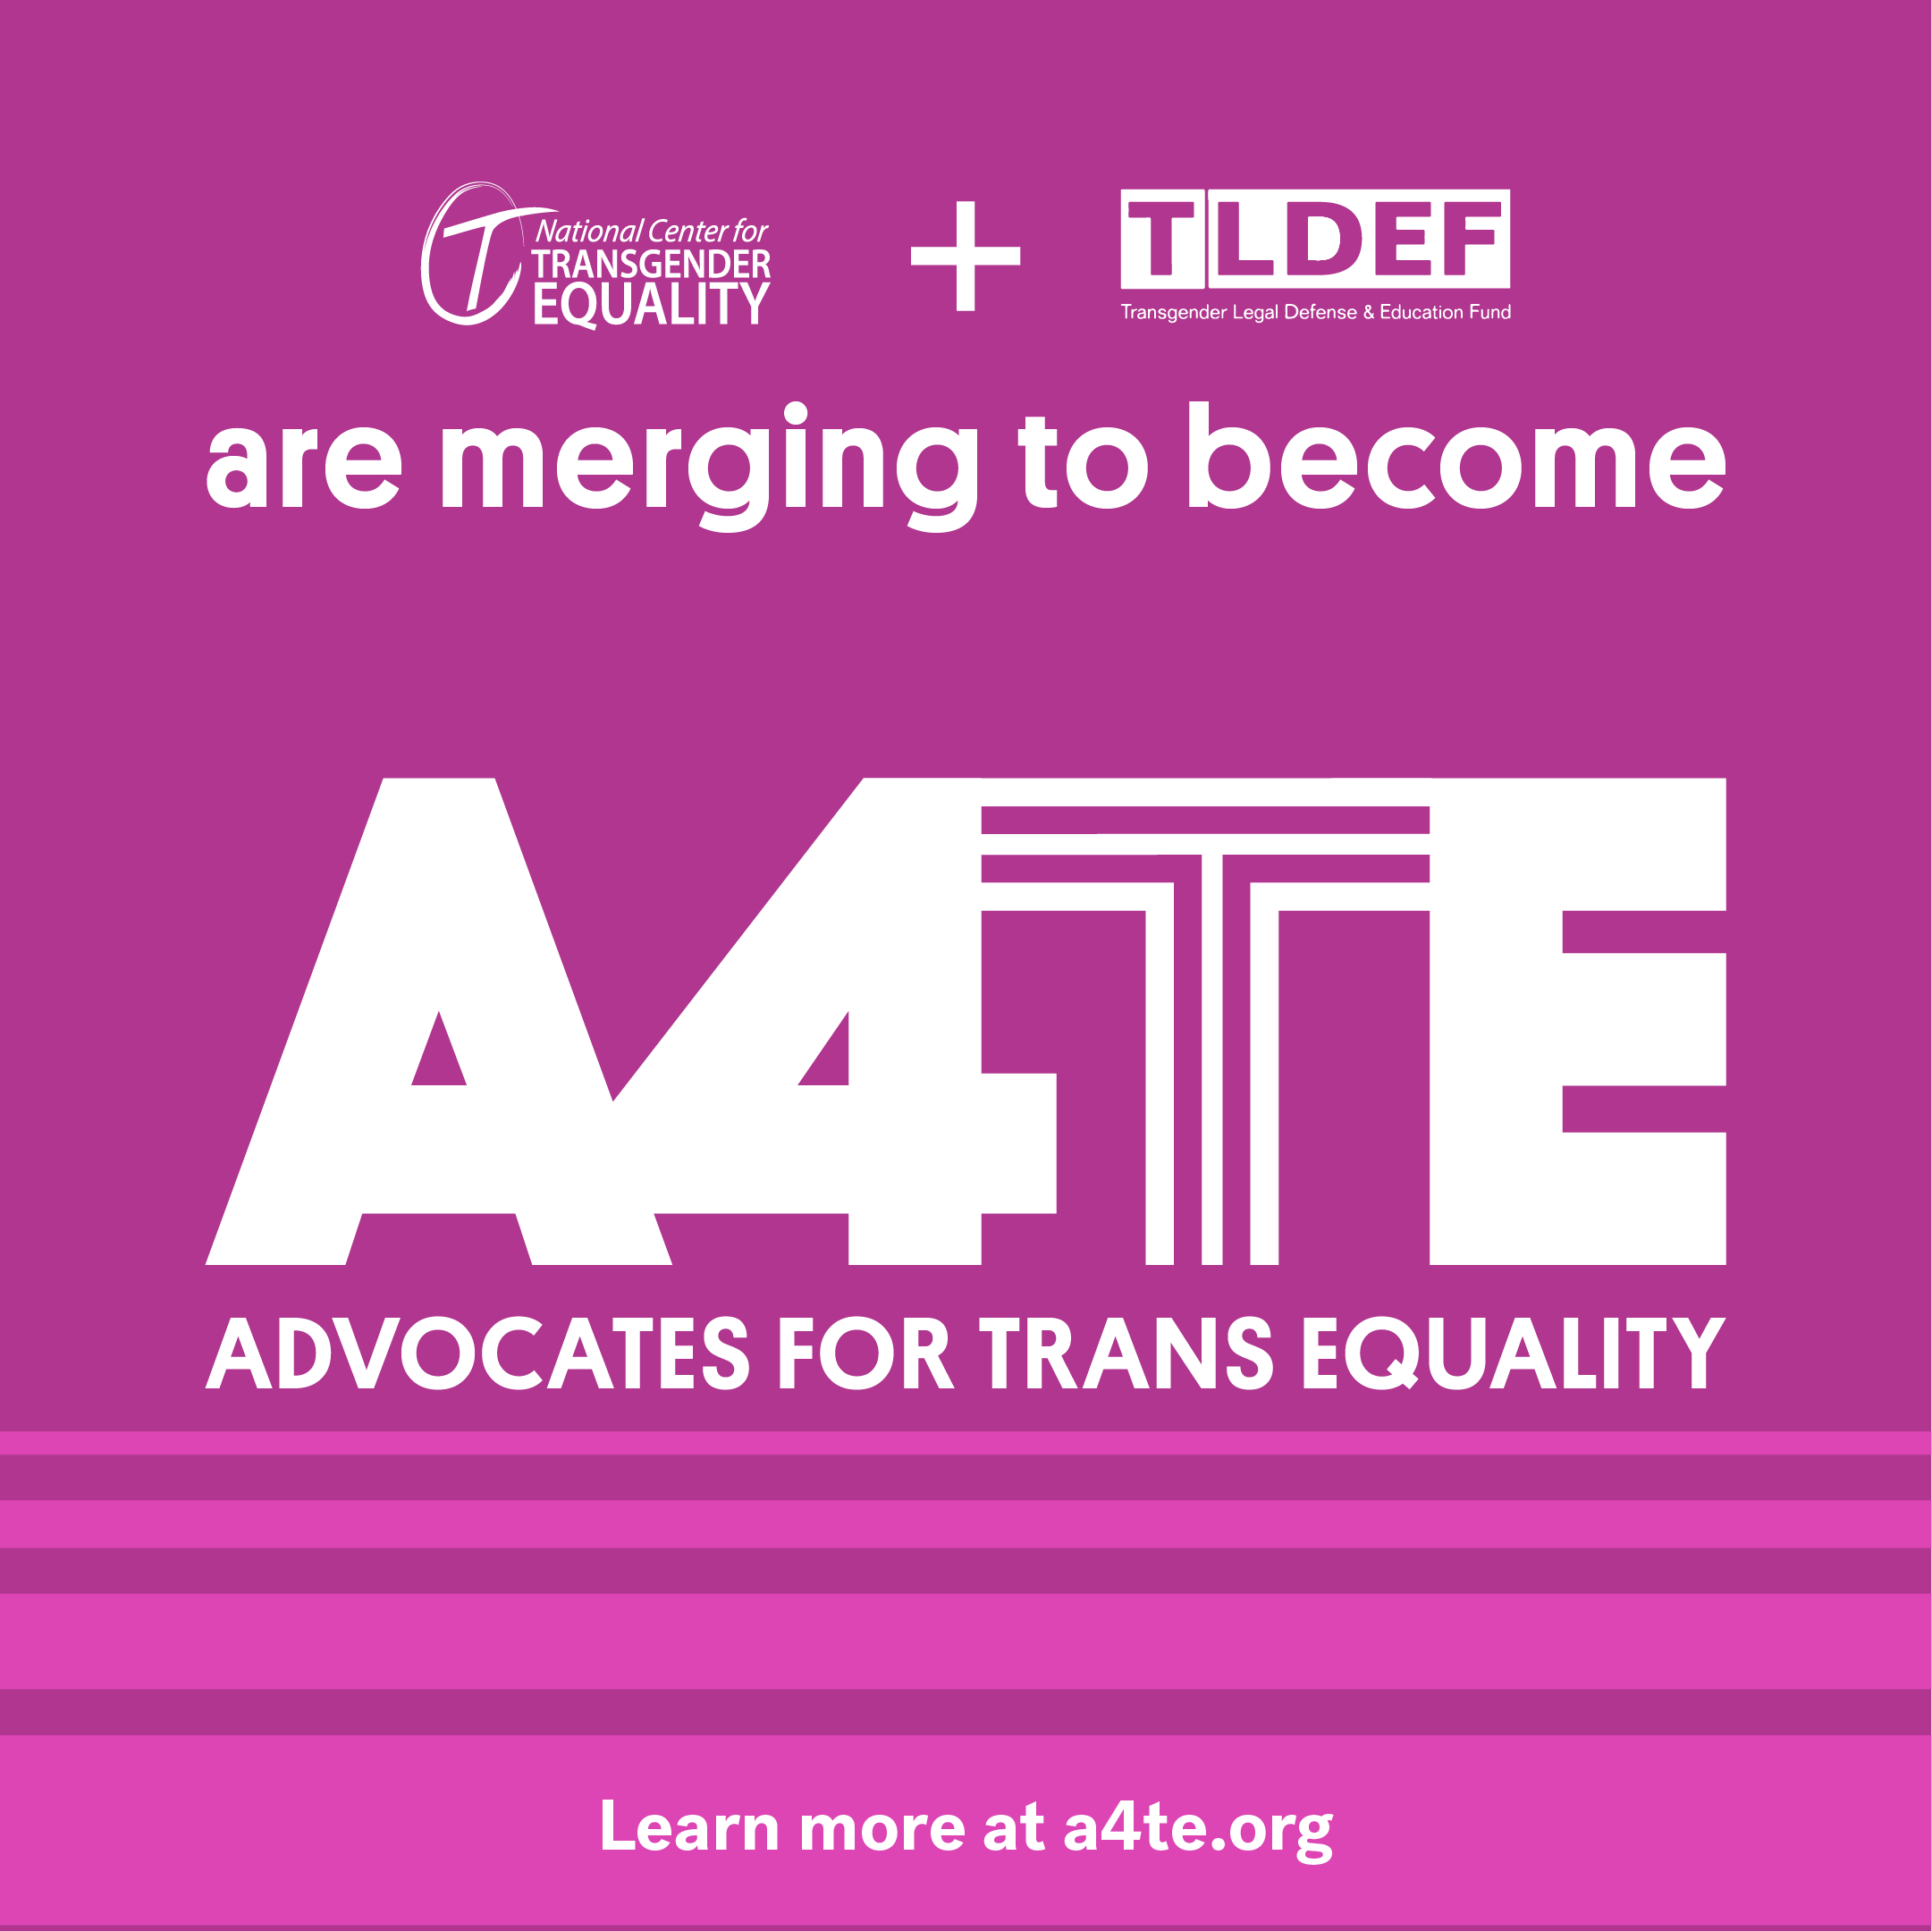 The National Center for Transgender Equality and Transgender Legal Defense and Education Fund are merging. Learn more.